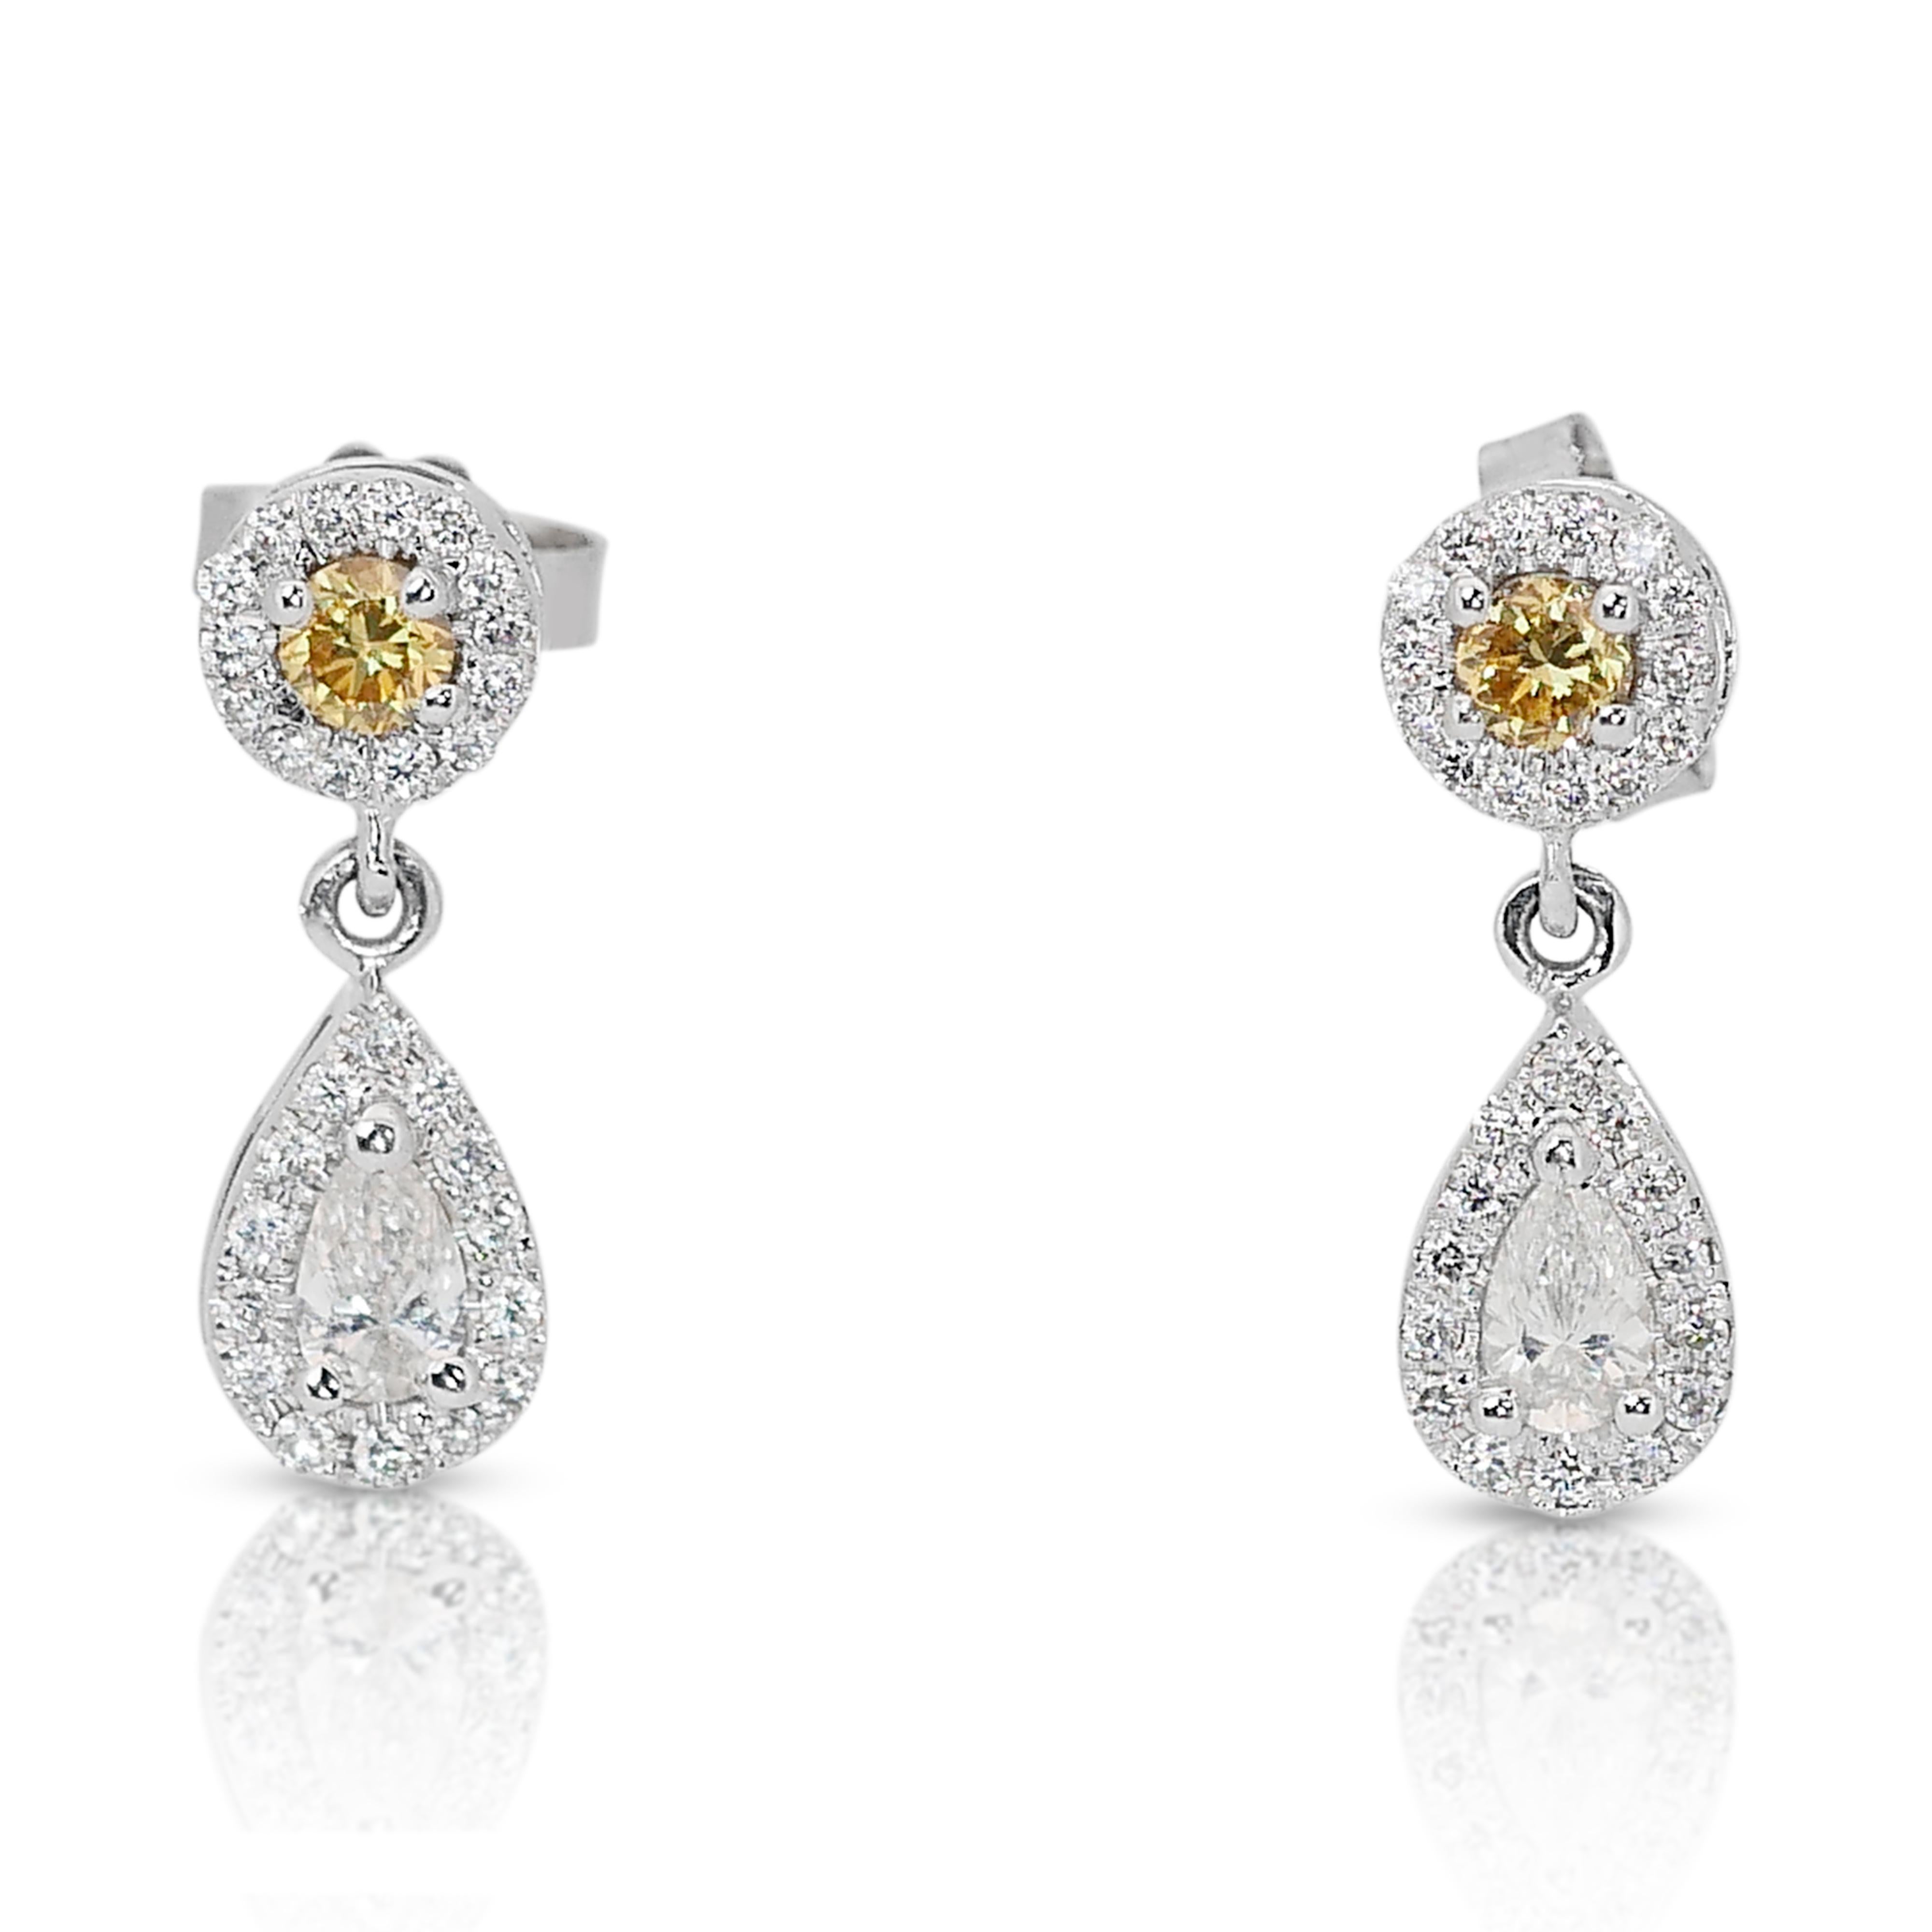 Dazzling 18k White Gold Natural Diamond Drop Earrings w/0.69 ct - IGI Certified

Indulge in the captivating brilliance of these 18k white gold drop earrings, boasting a stunning display of natural fancy vivid yellow diamonds. The center piece